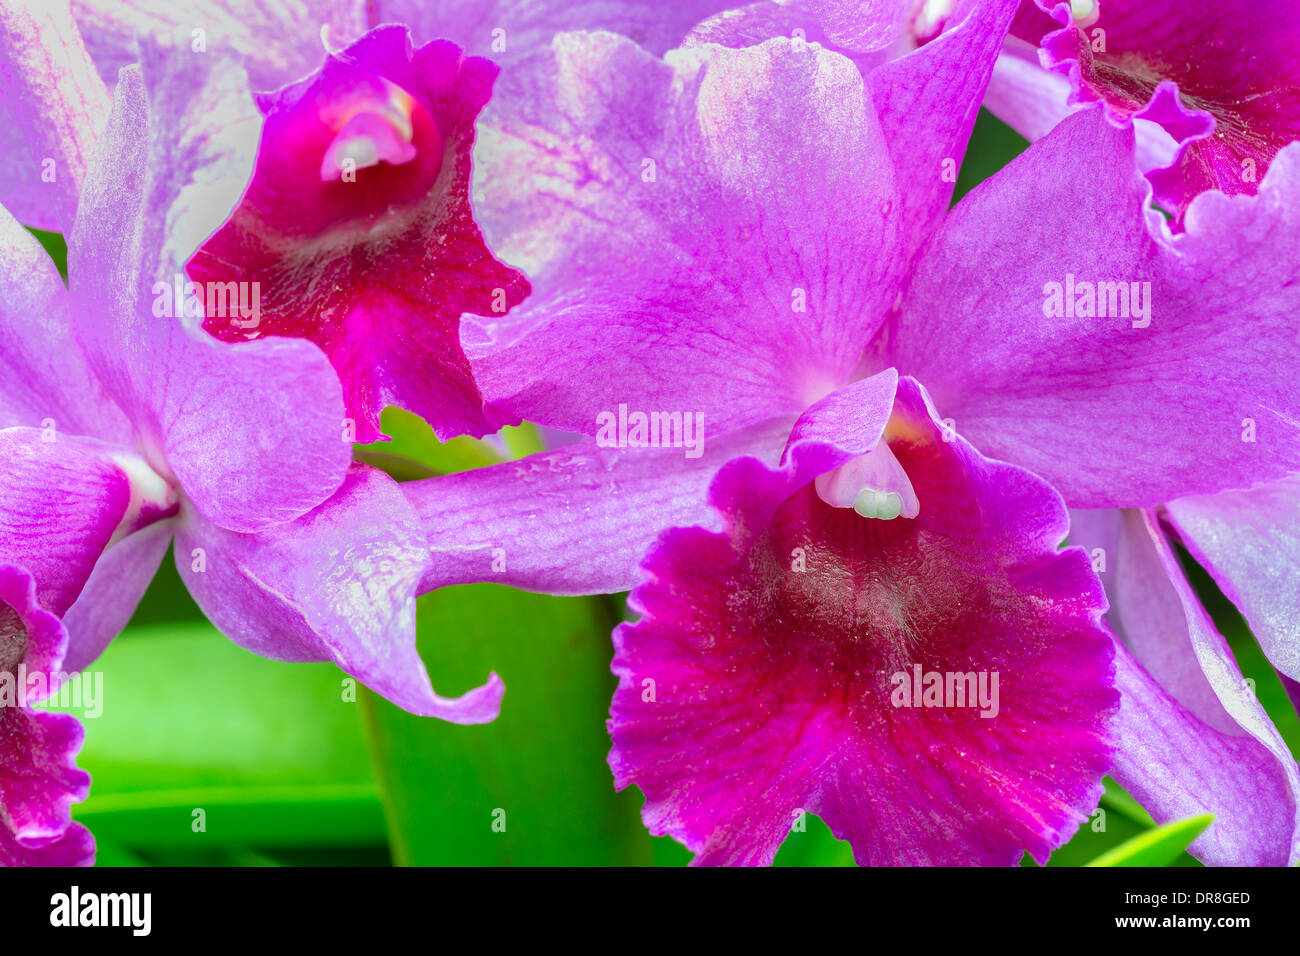 A cluster of purple and white cattleya orchids on the vine Stock Photo